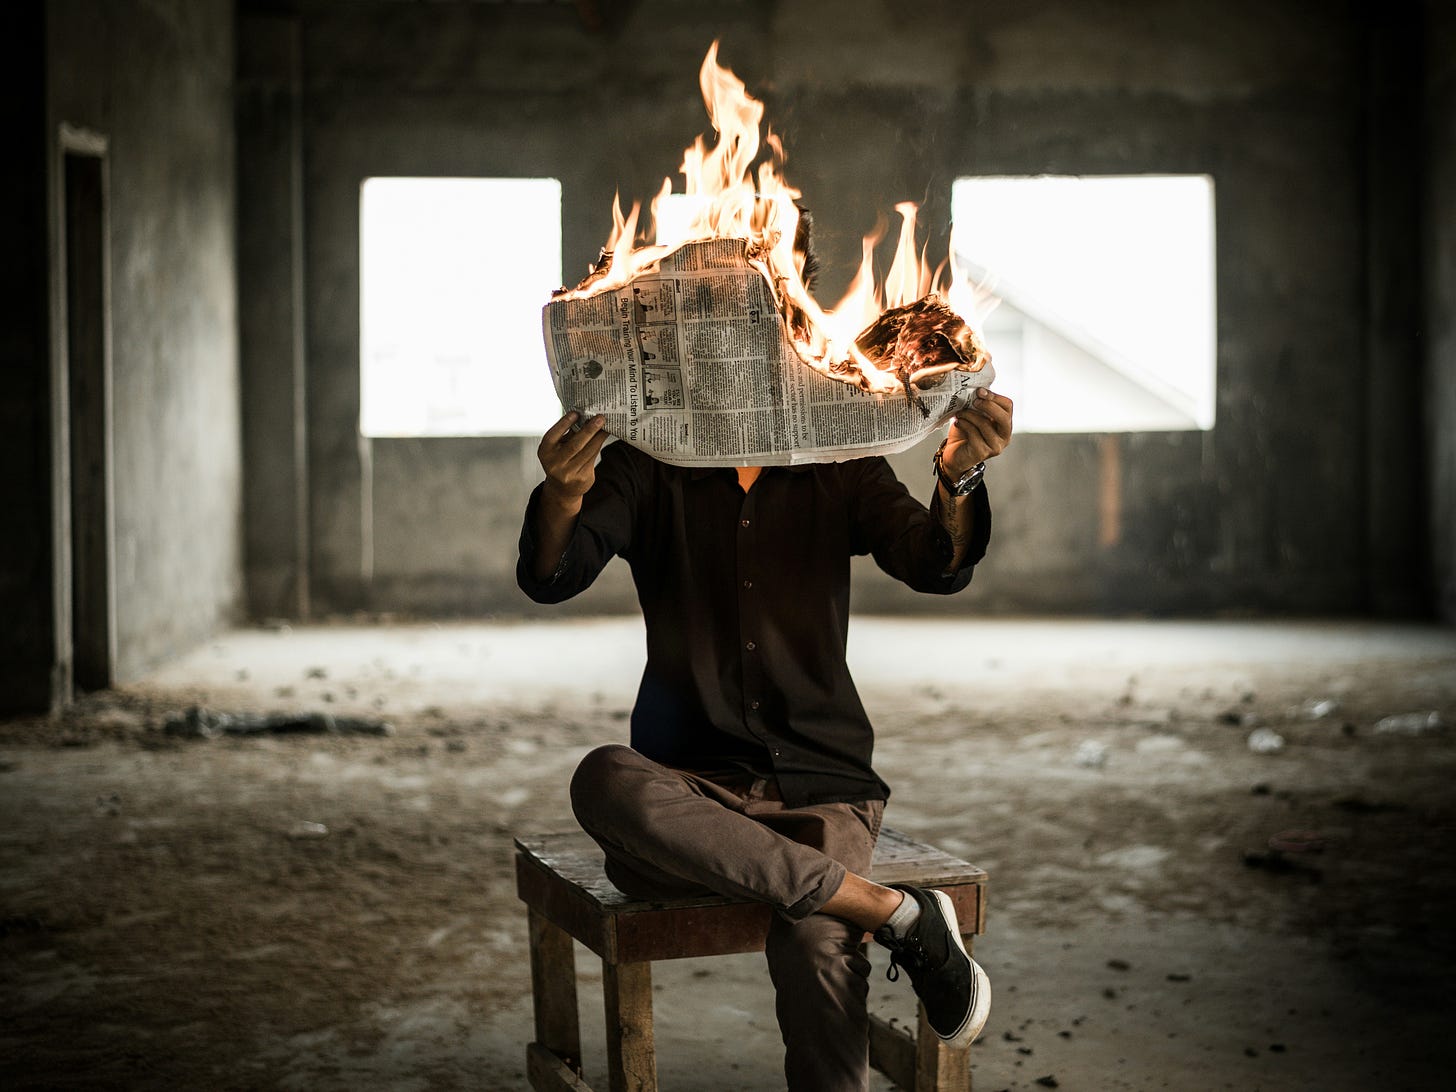 A person in a dark room, reading a newspaper. The newspaper is on fire.